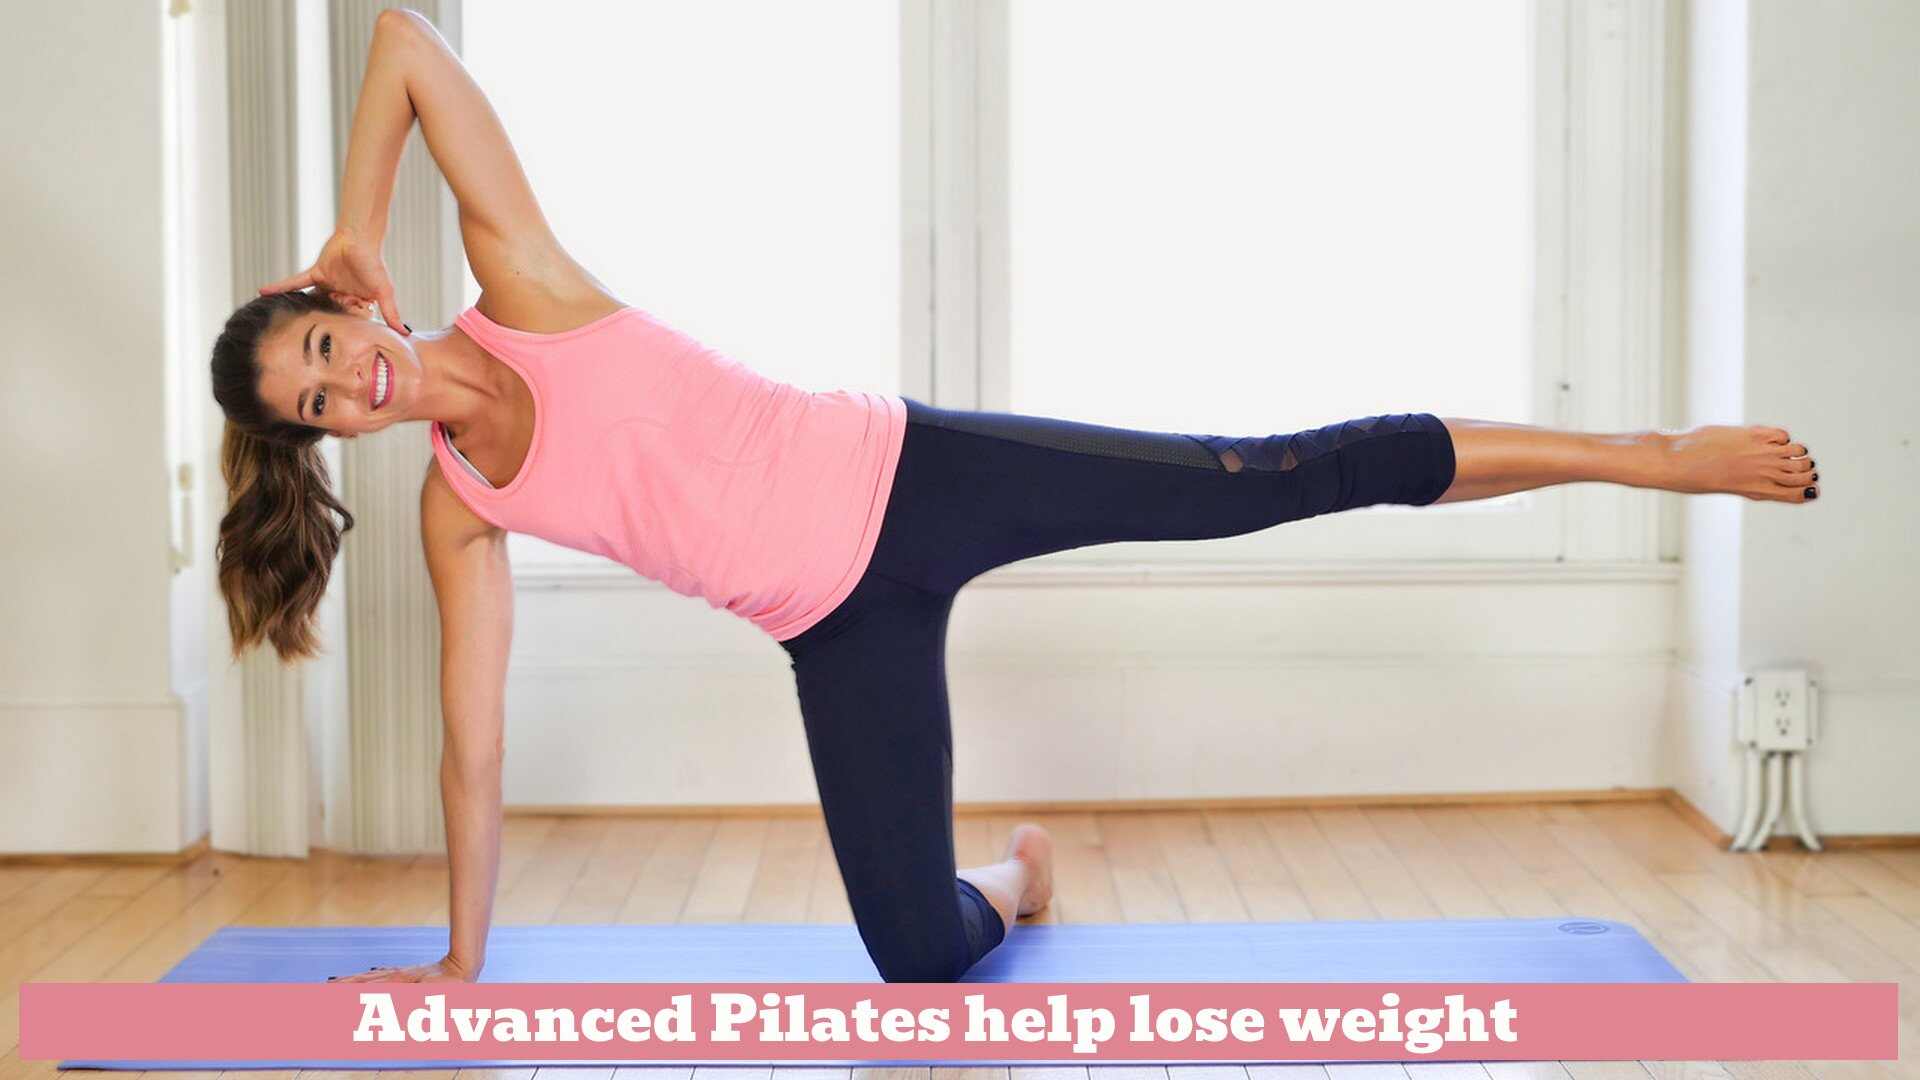 What are some Advanced Pilates exercises